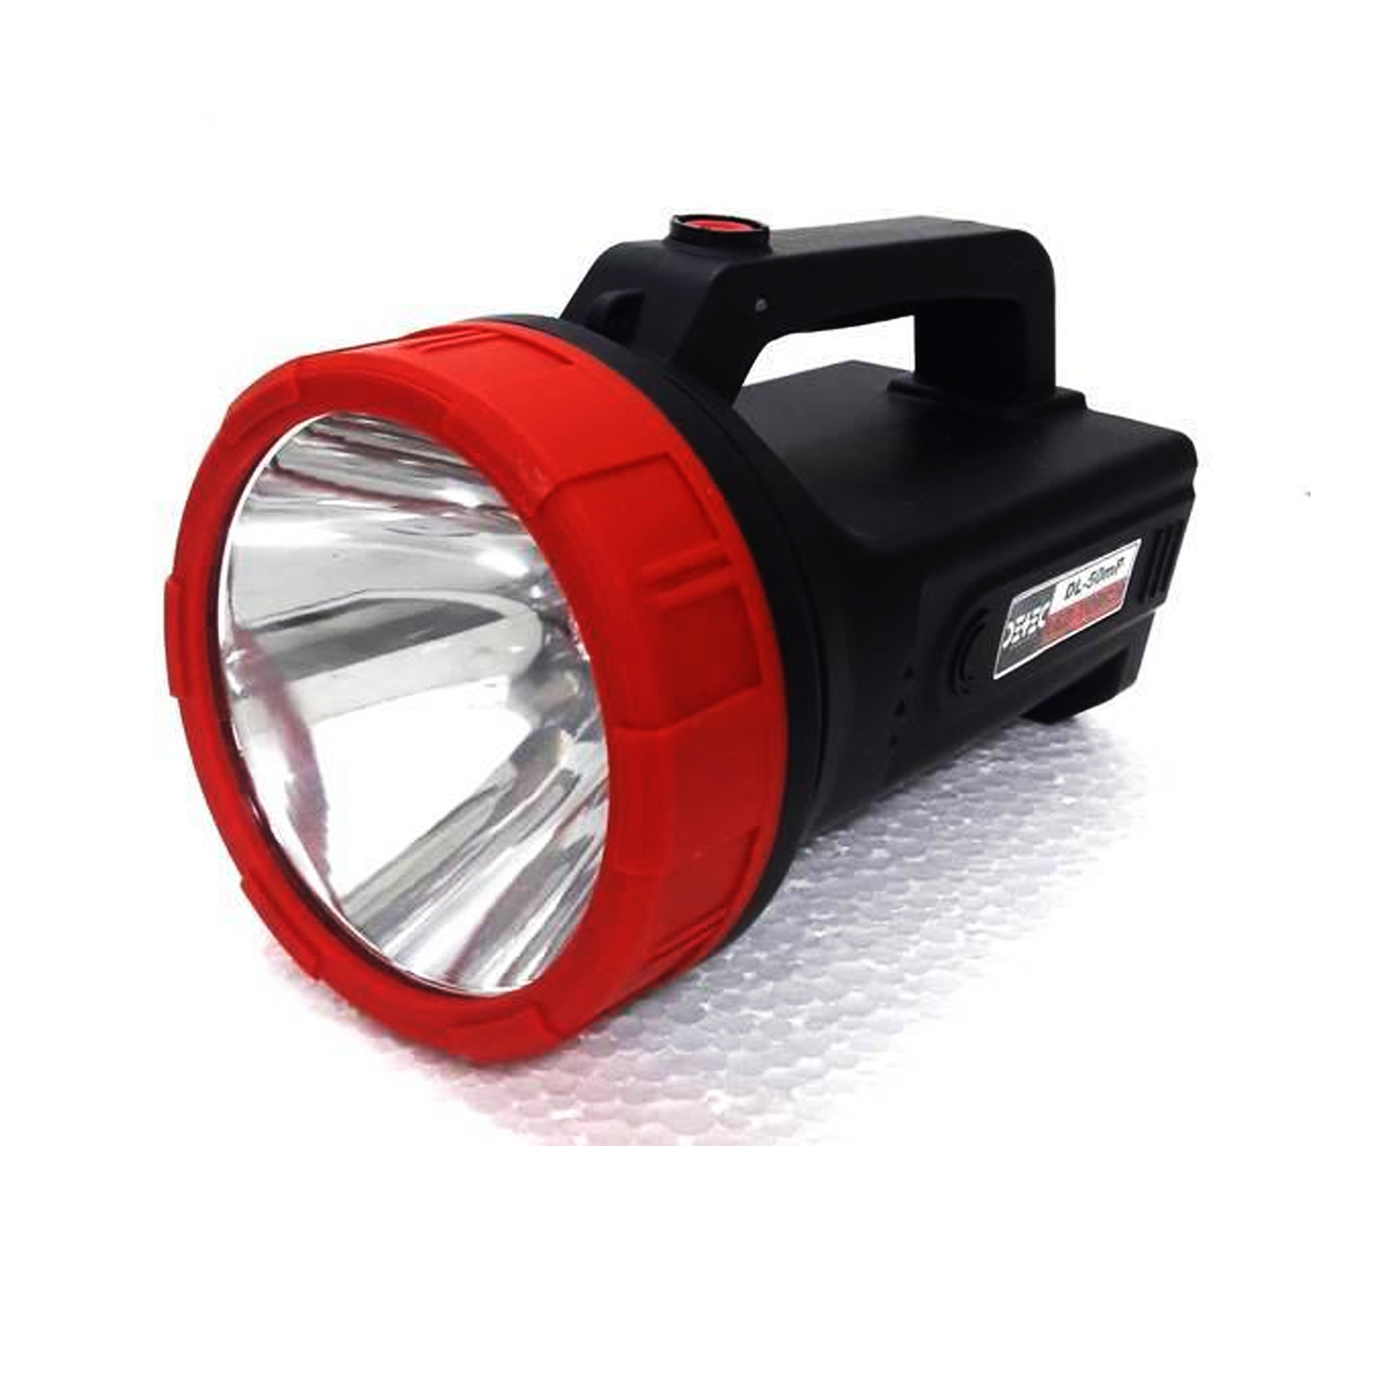 Rechargeable 10 Watt Searchlight/Torch  - Led Bulb